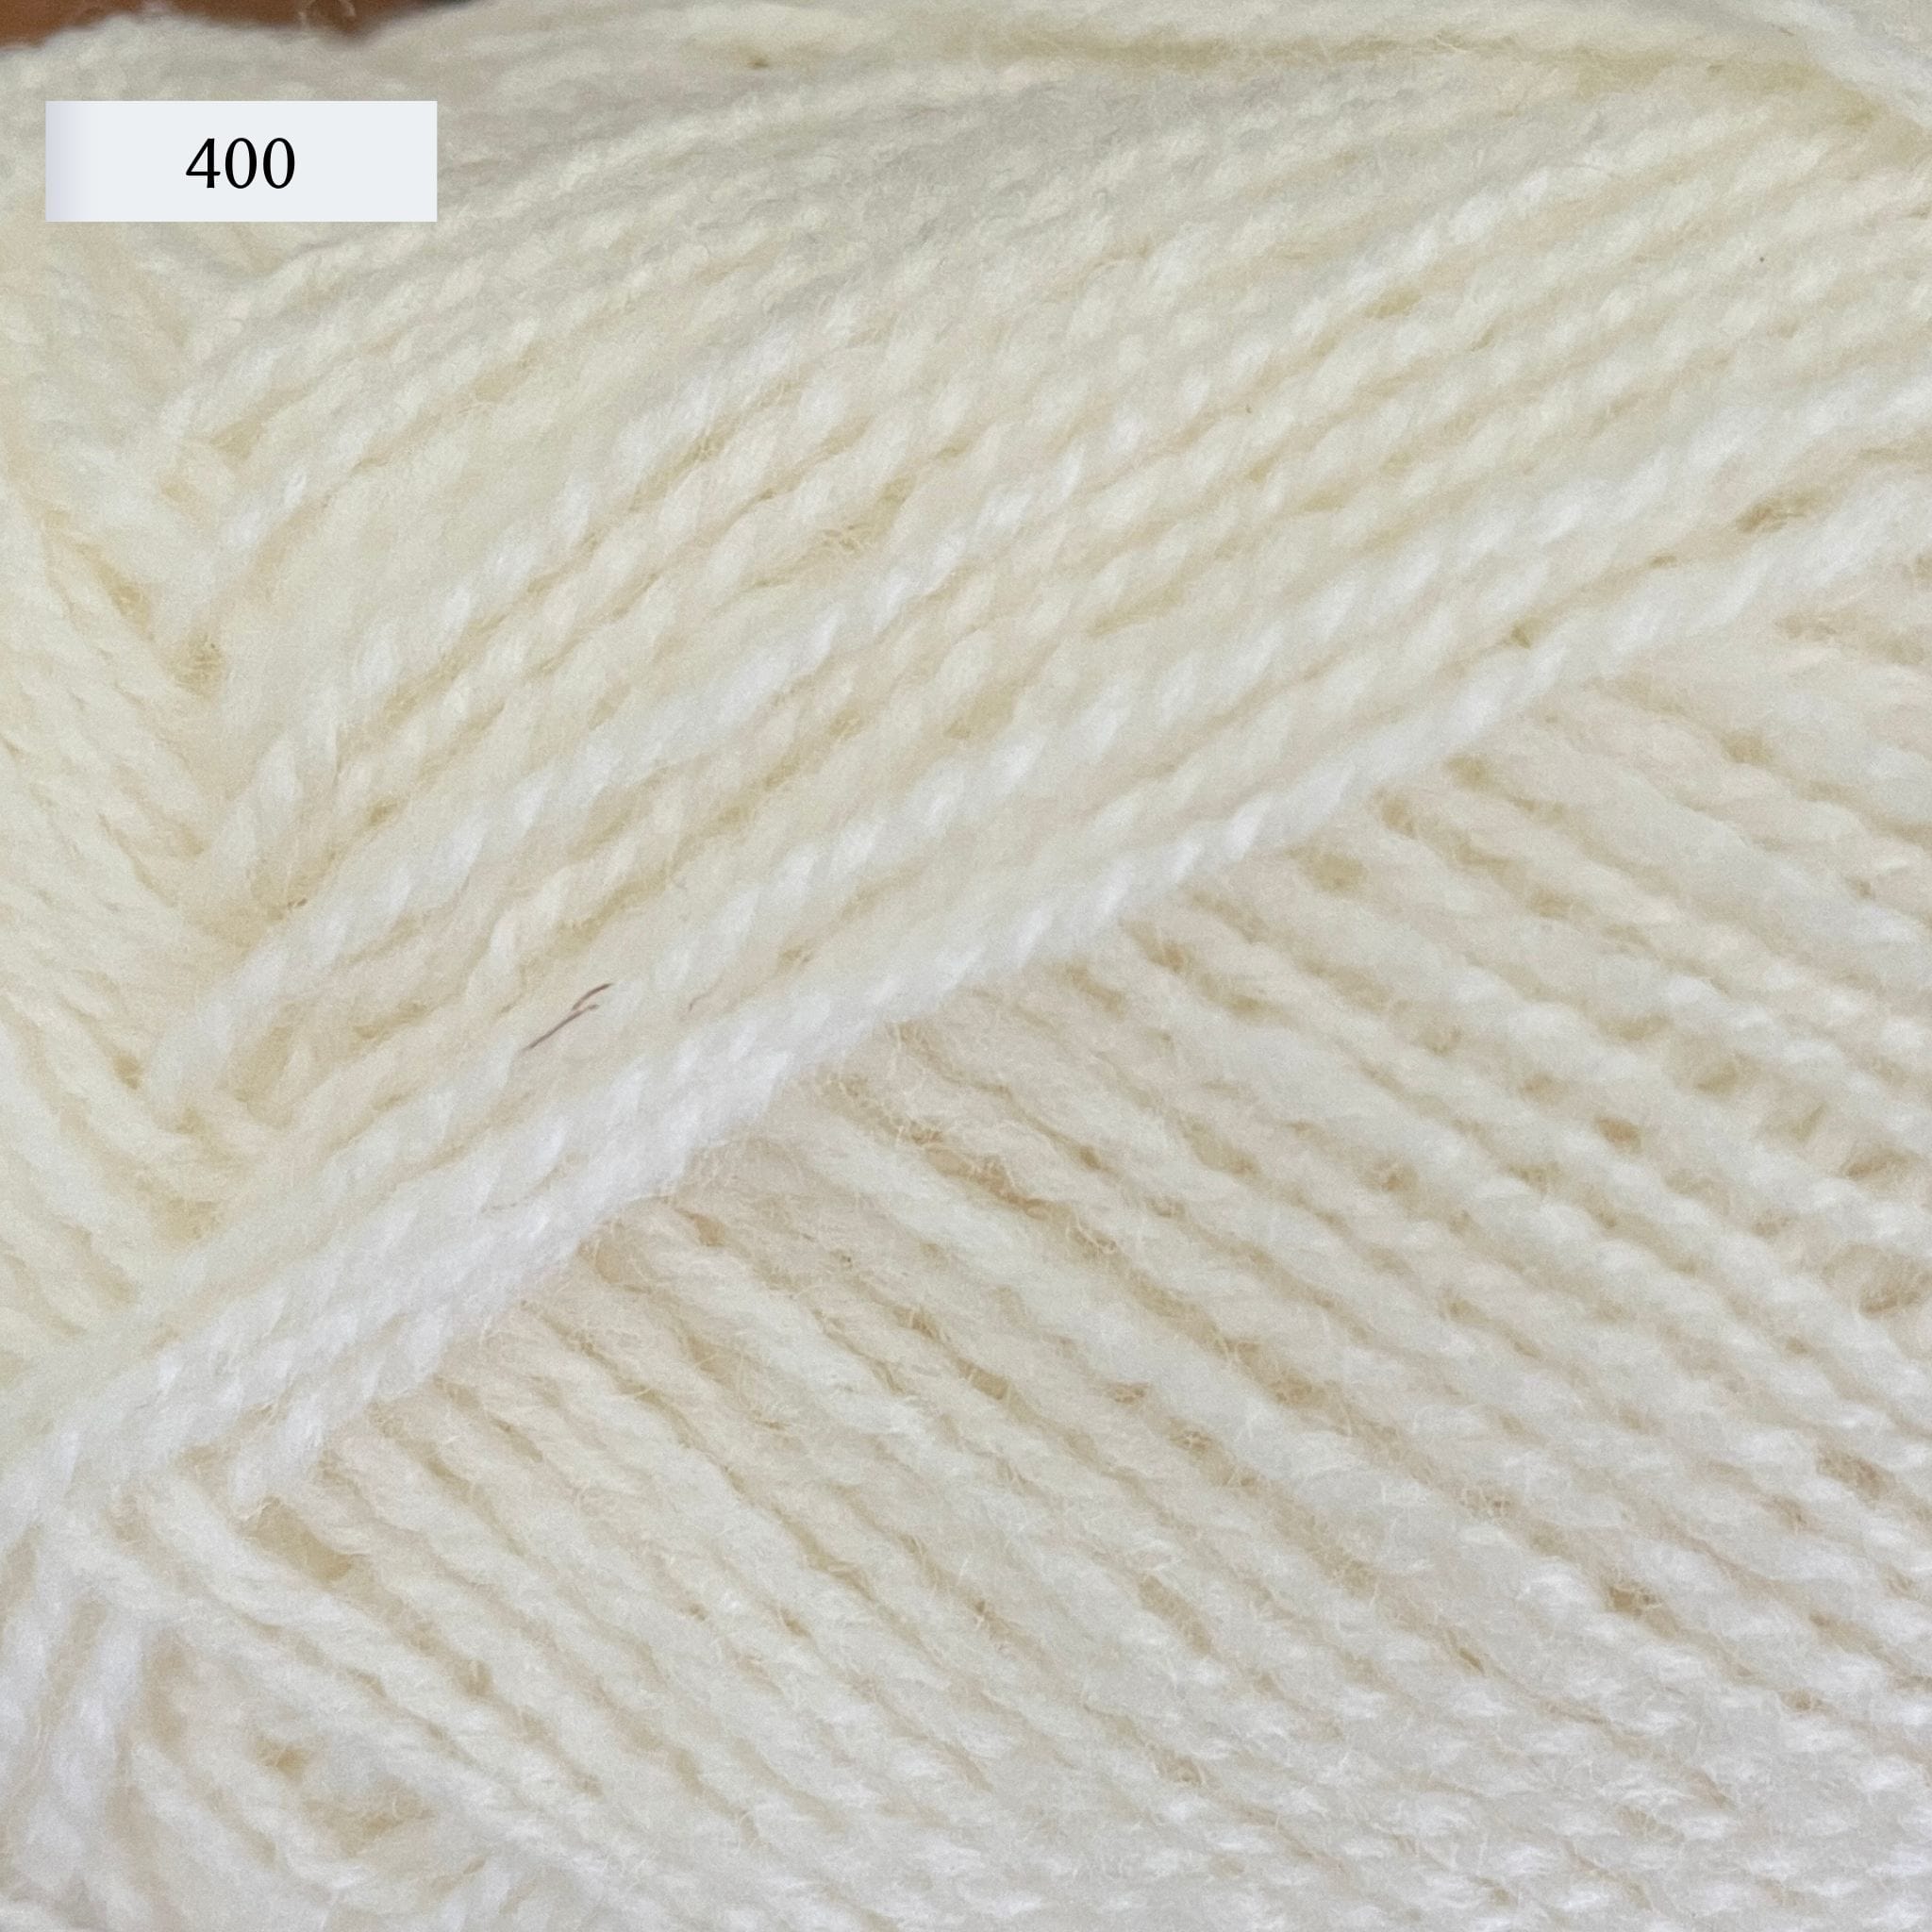 Rauma Gammelserie 2ply wool yarn, fingering weight, in color 400, pure white